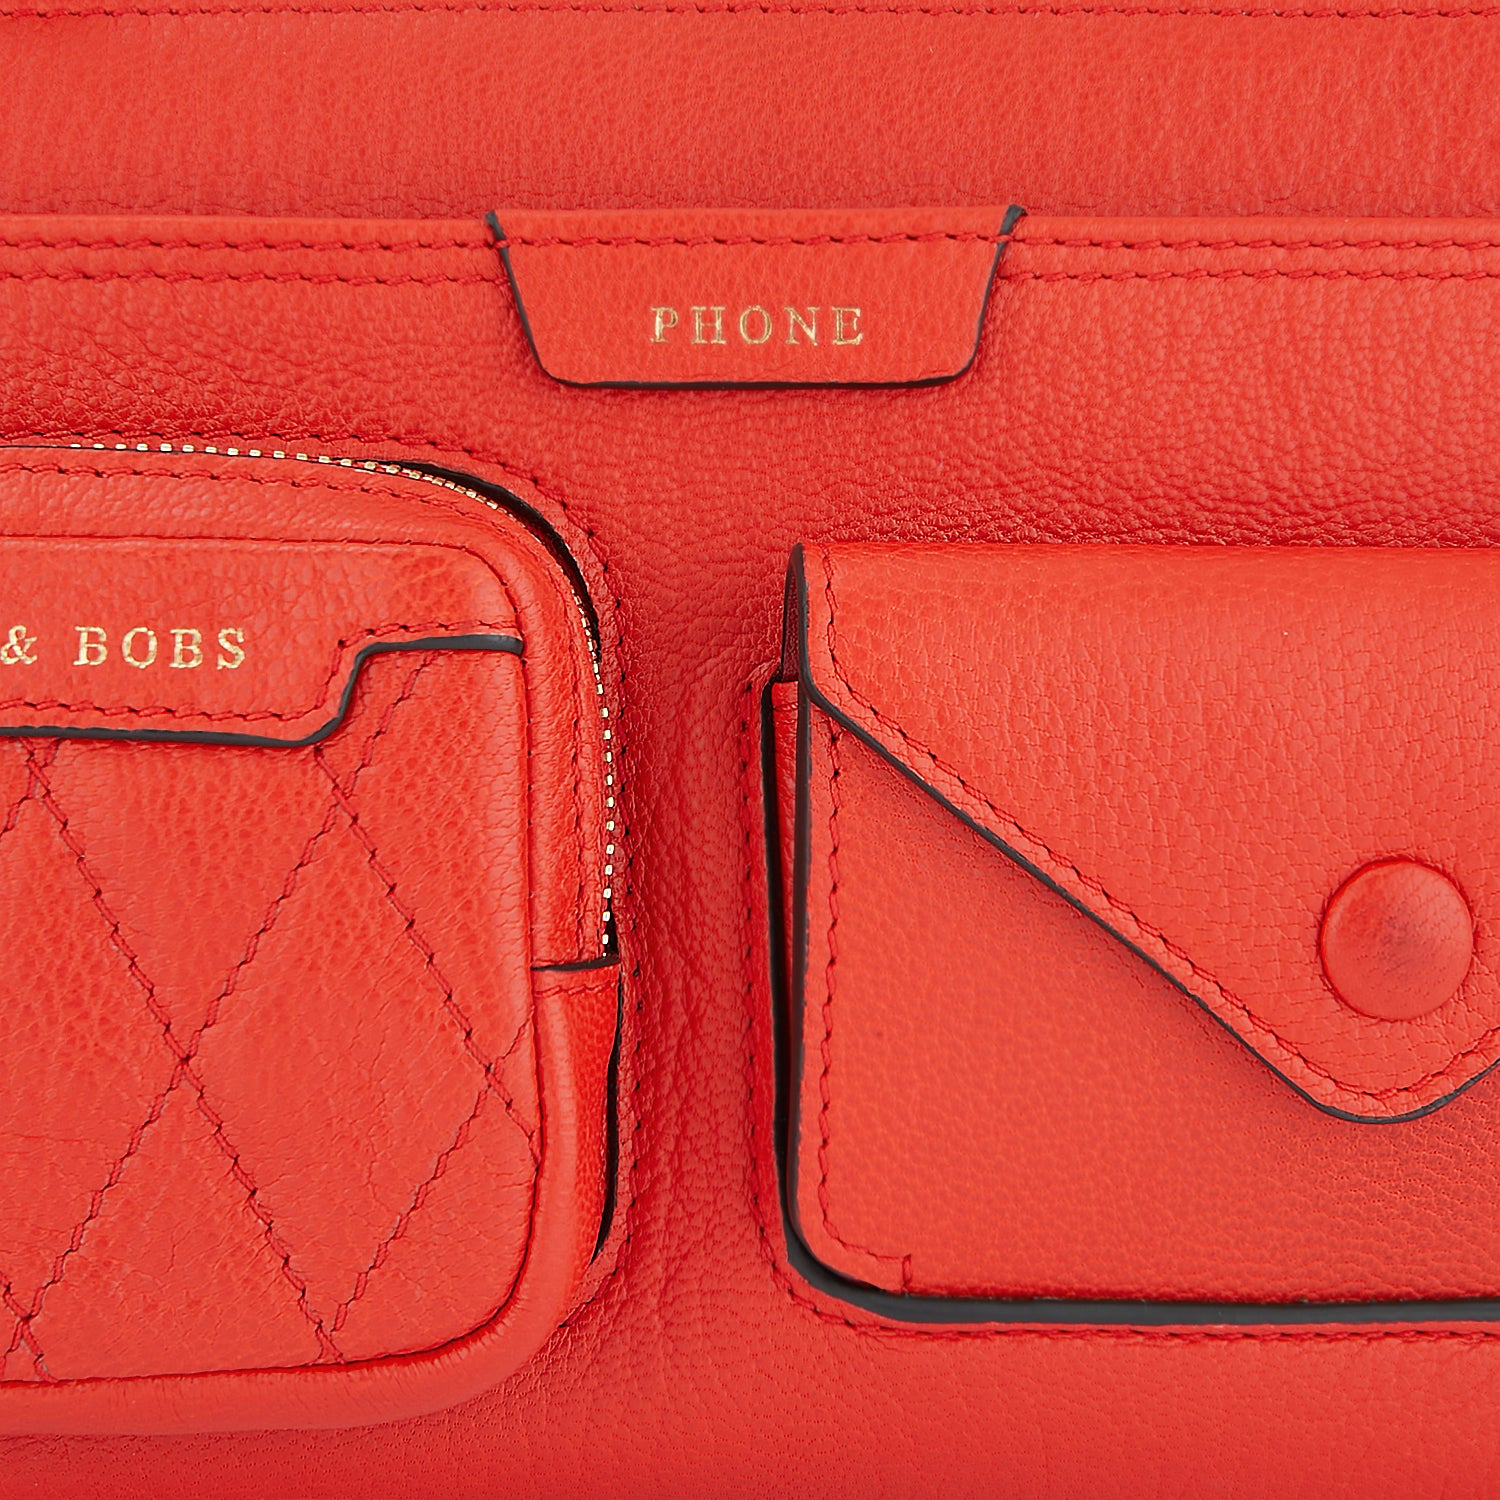 Multi Pocket Pouch on Strap -

                  
                    Shiny Grain Leather in Flame Red -
                  

                  Anya Hindmarch EU
